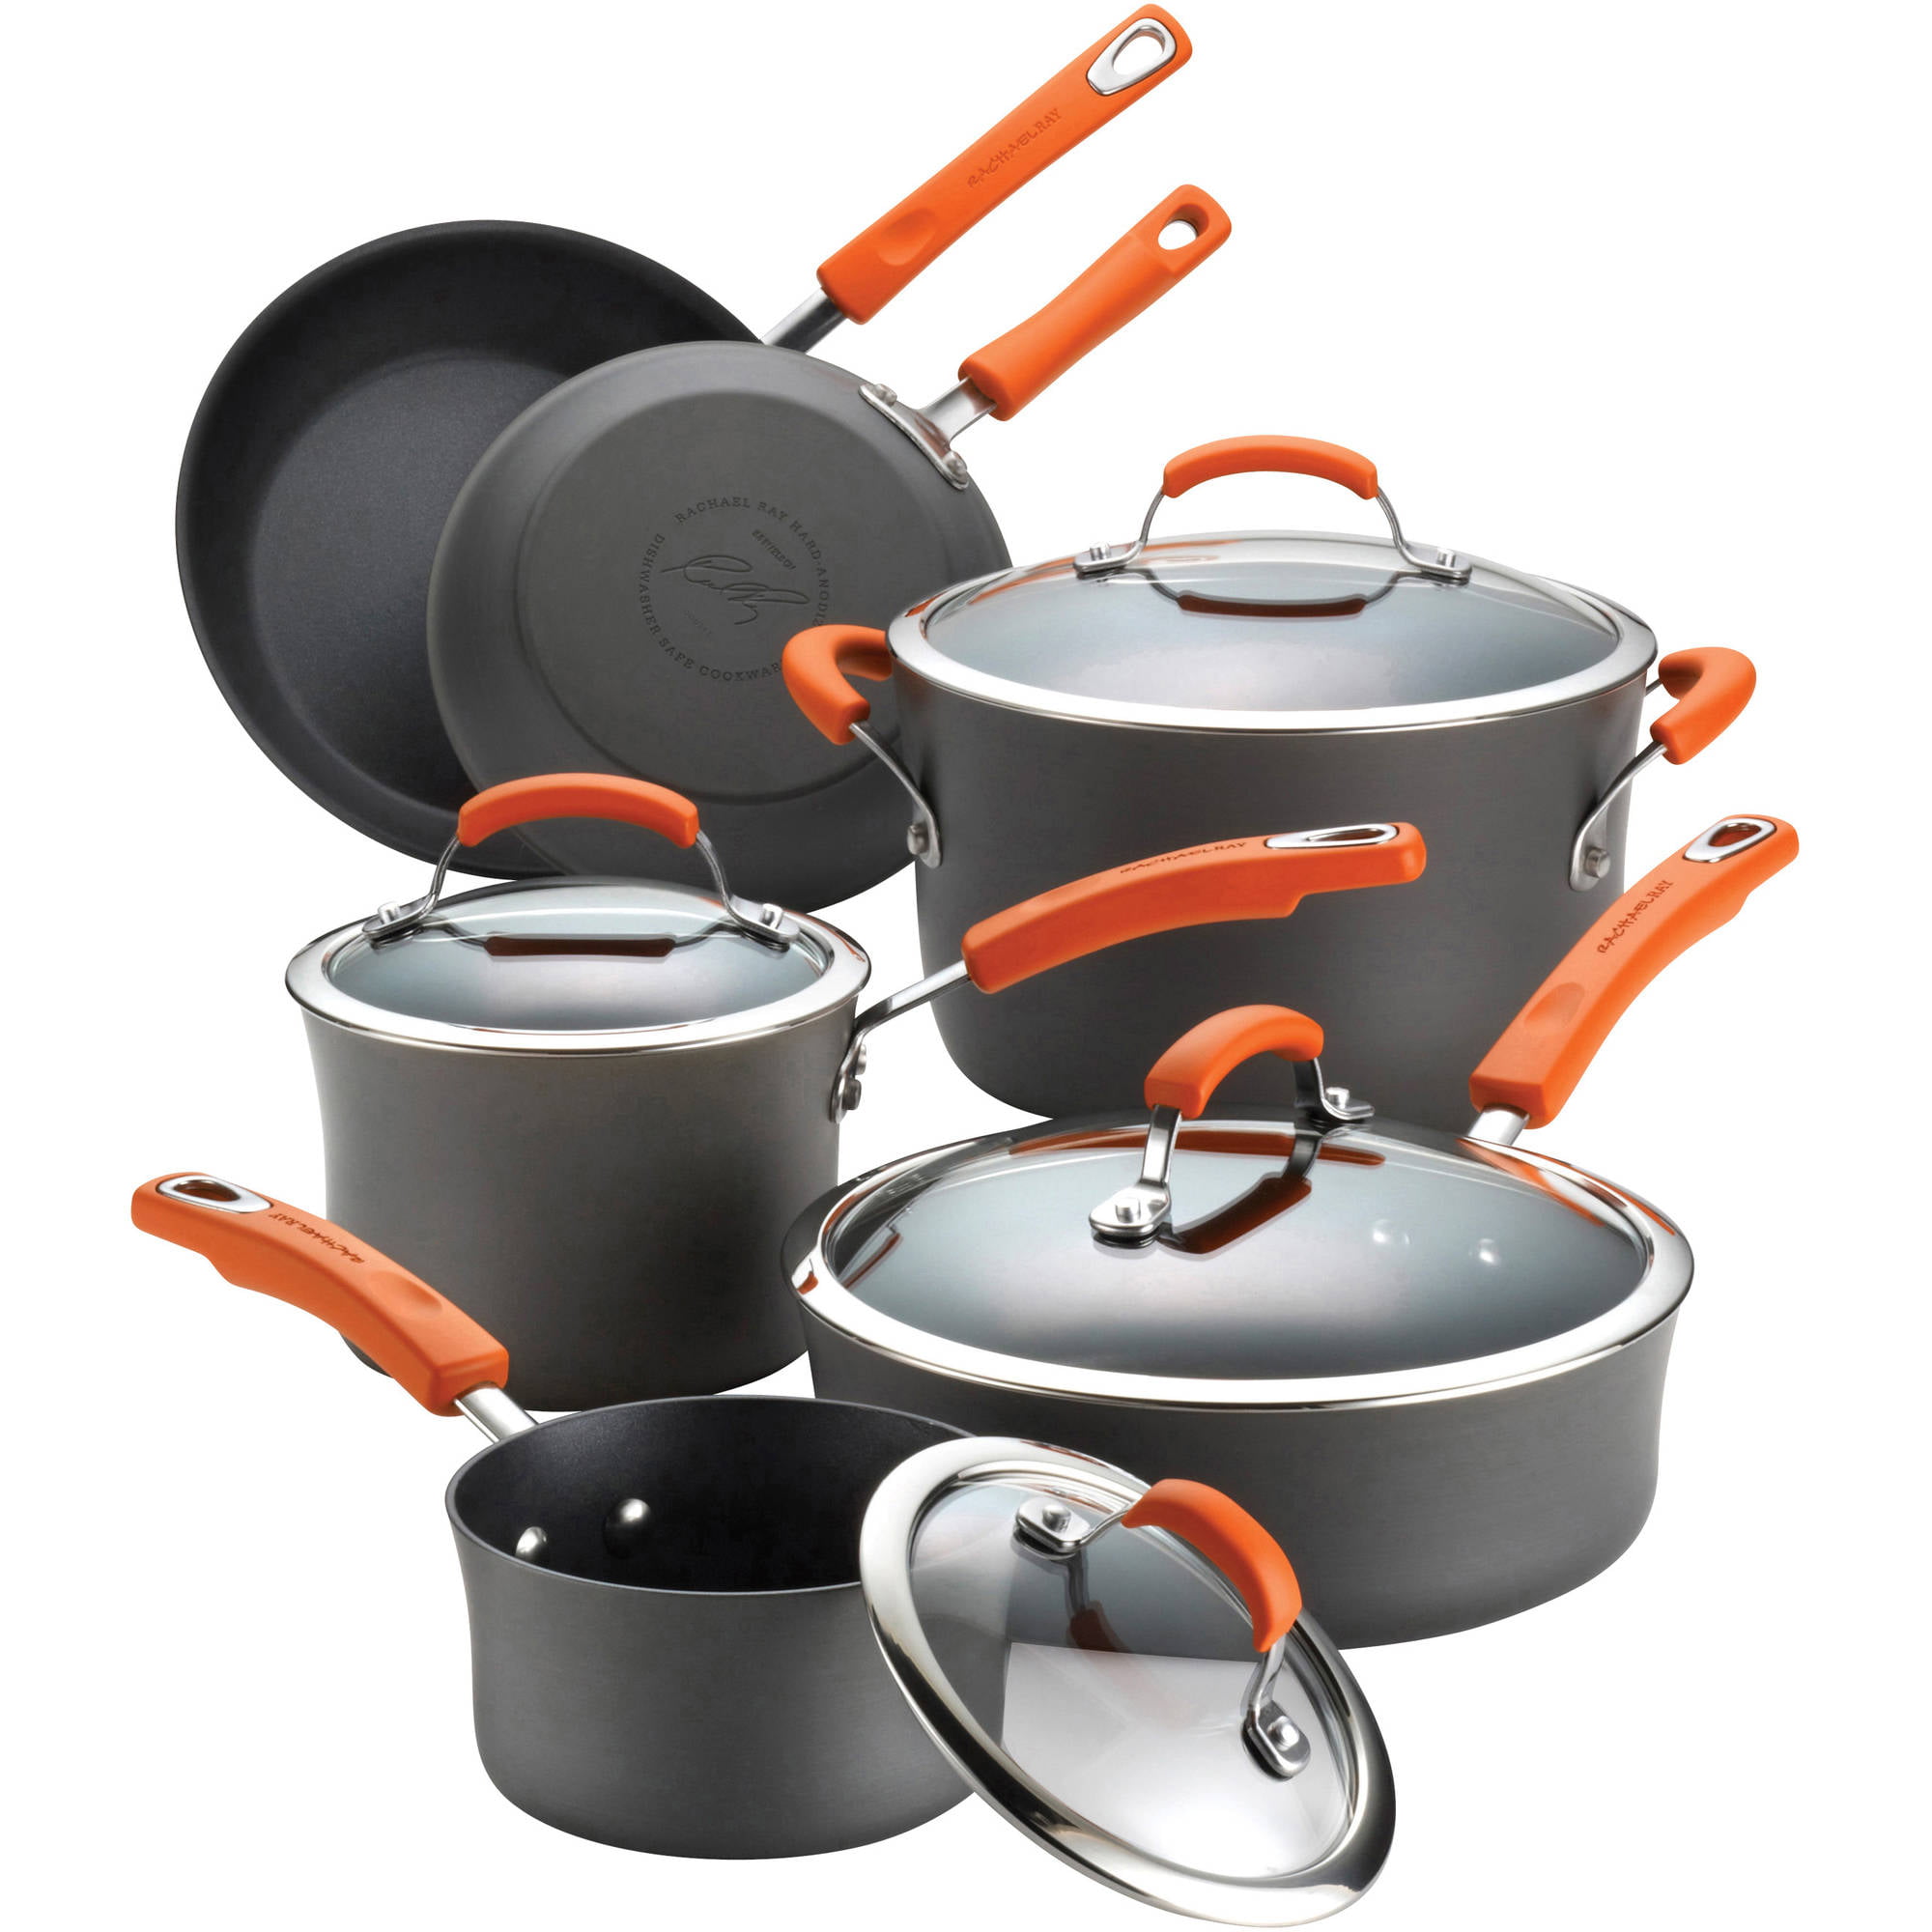 Rachael Ray Hard Anodized 10 Piece Cookware Set